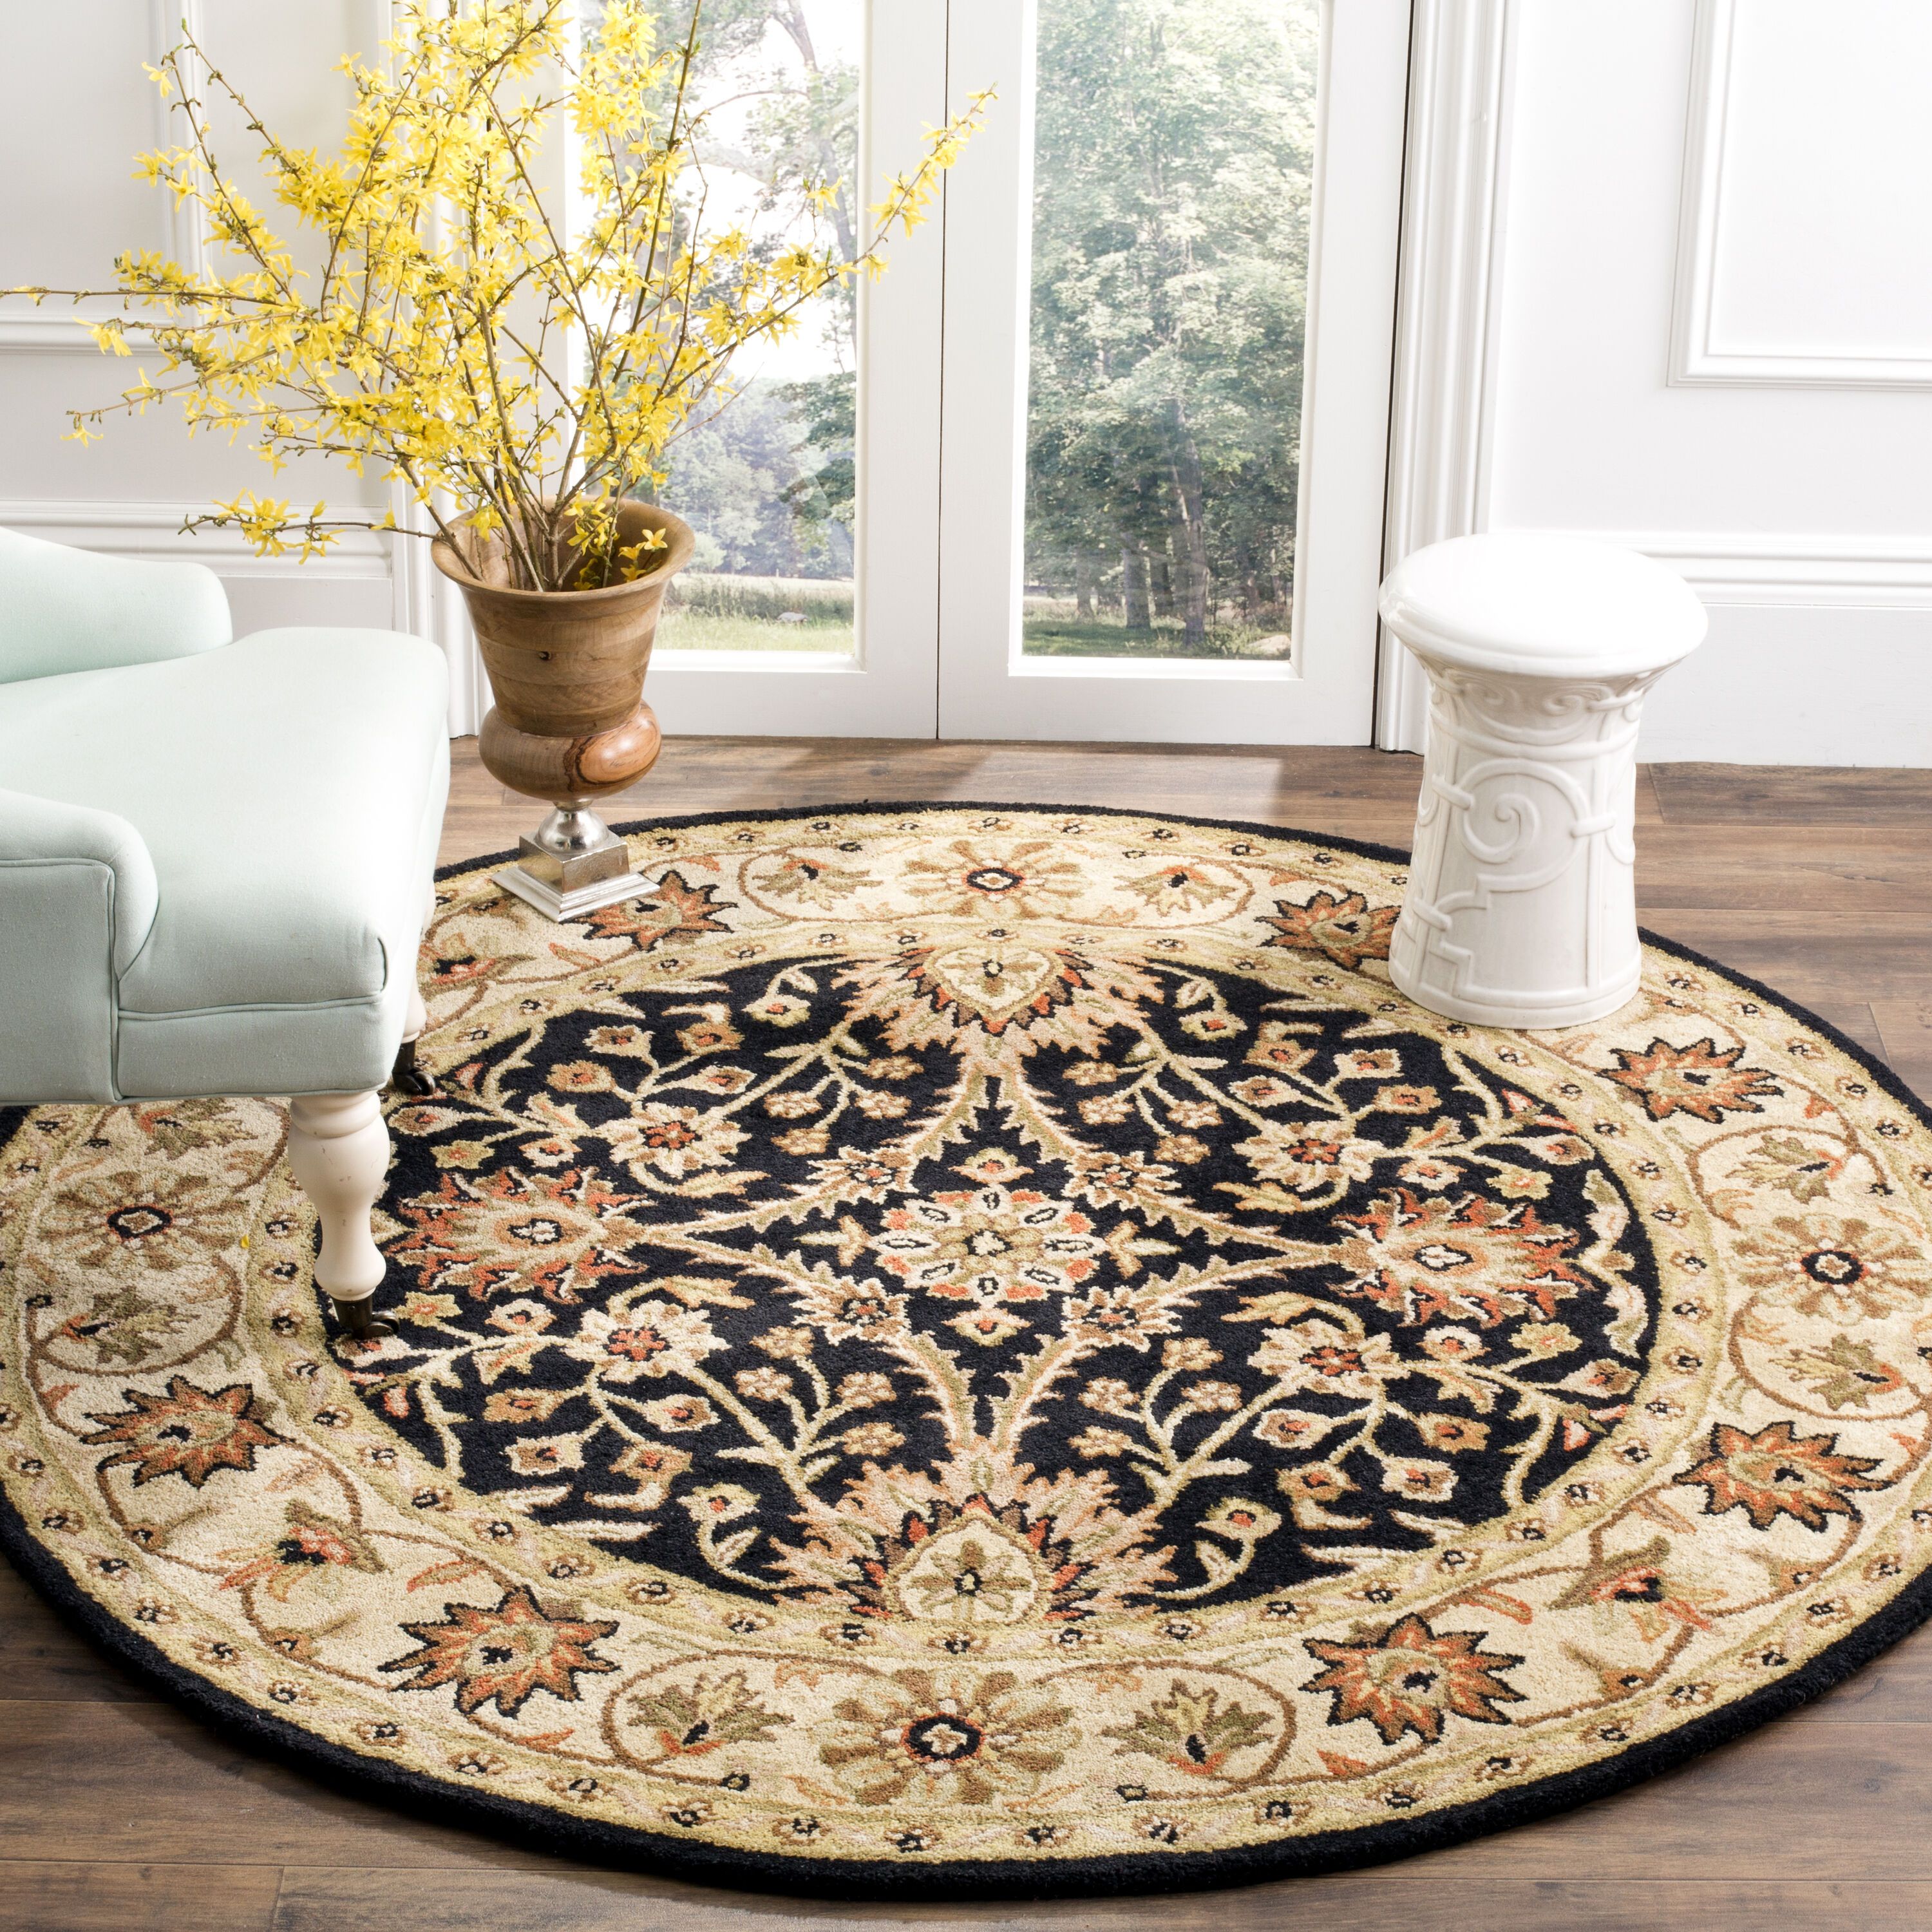 Safavieh 5 X 7 Wool Black Oval Indoor Floral/botanical Vintage Area Rug In  The Rugs Department At Lowes Throughout Botanical Oval Rugs (Photo 5 of 15)